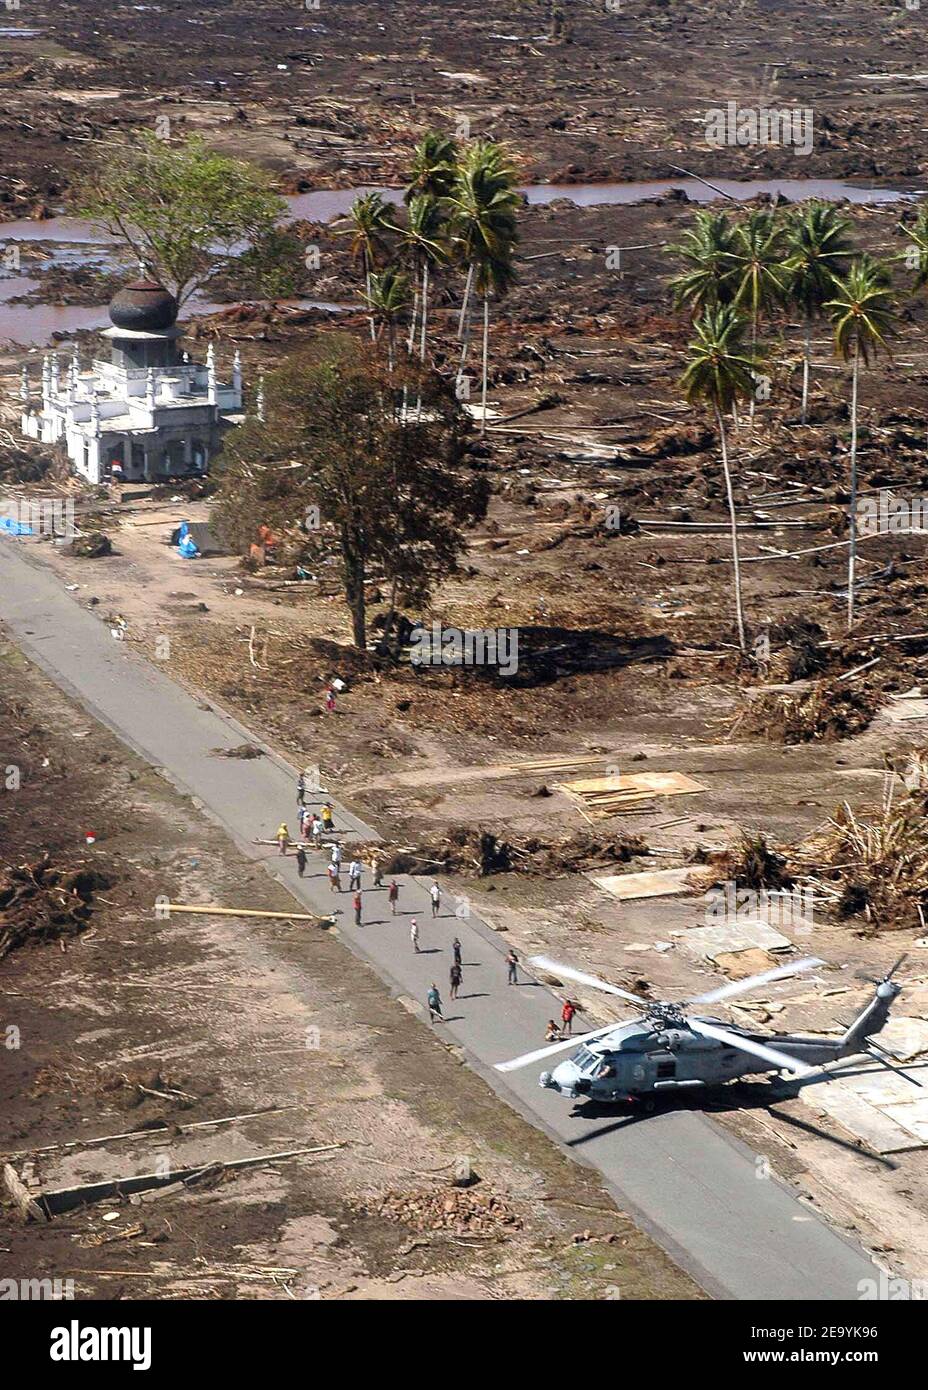 An SH-60B Seahawk helicopter, assigned to the 'Saberhawks' of Helicopter Anti-Submarine Squadron Light Four Seven (HSL-47), lands to distribute relief supplies at a village in the island of Sumatra, Indonesia. Helicopters assigned to Carrier Air Wing Two (CVW-2) and Sailors from USS Abraham Lincoln (CVN 72) are supporting Operation Unified Assistance, the humanitarian operation effort in the wake of the Tsunami that struck South East Asia. Photo by Jacob J. Kirk/USN via ABACA. Stock Photo